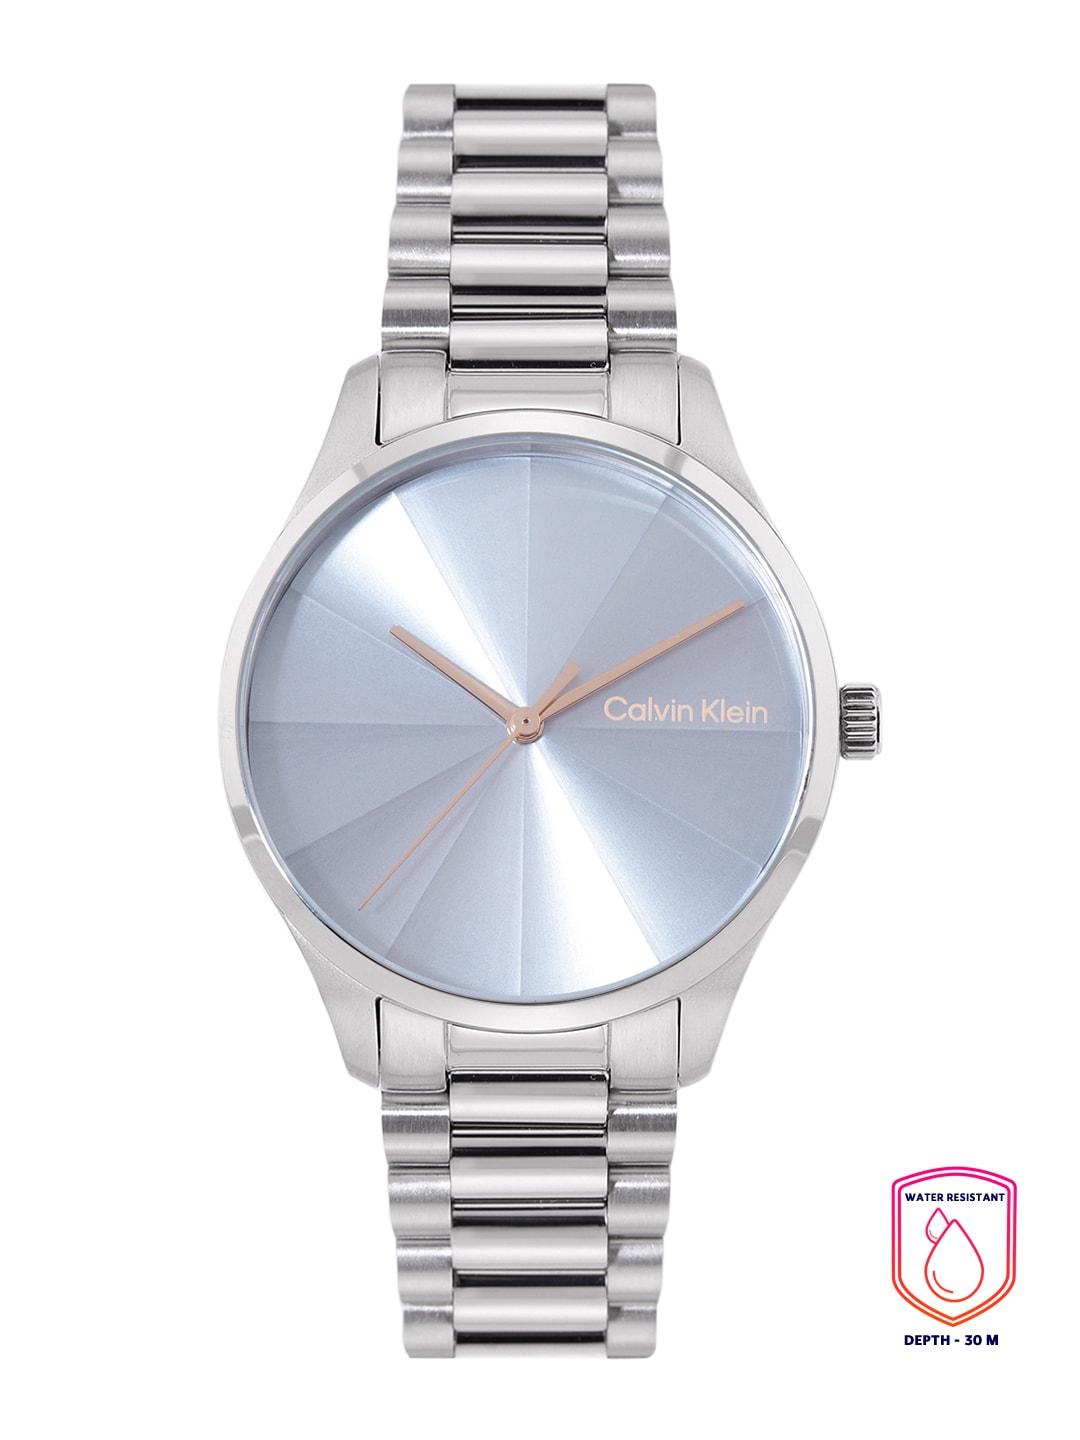 calvin-klein-unisex-patterned-dial-&-stainless-steel-analogue-watch-25200230